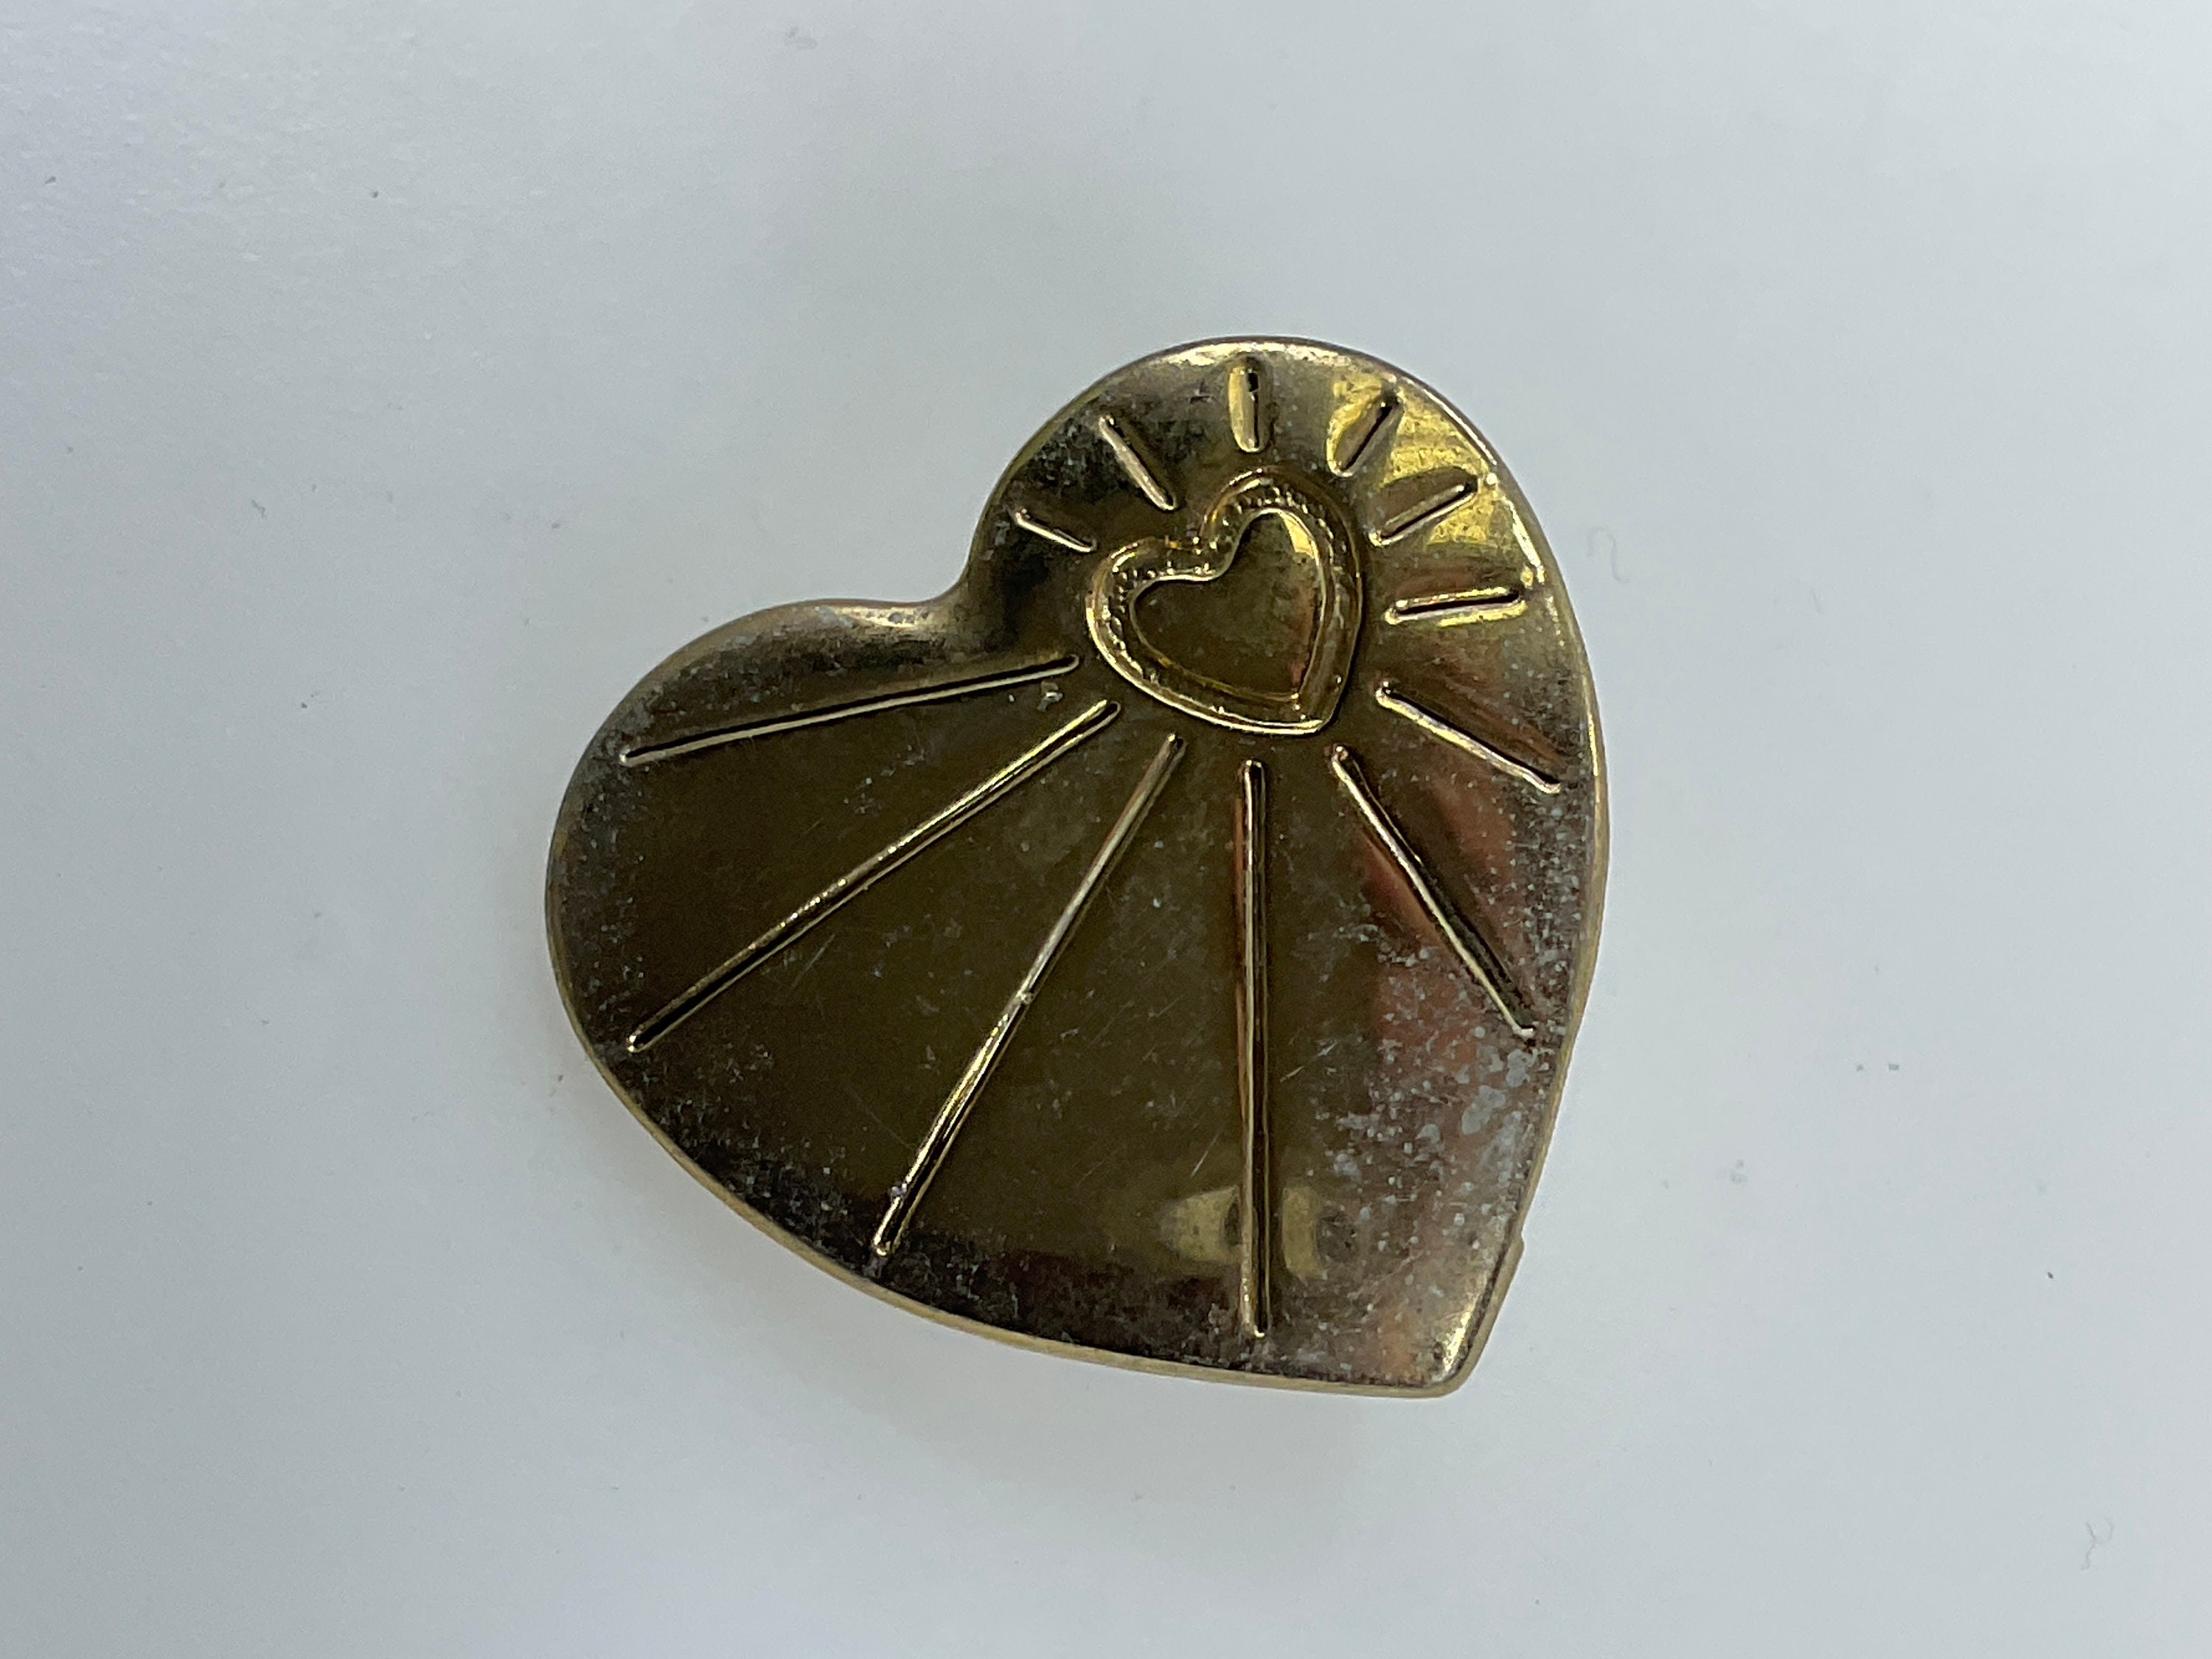 Collectable Variety Gold Heart Pins - Bengies Drive-In Theatre